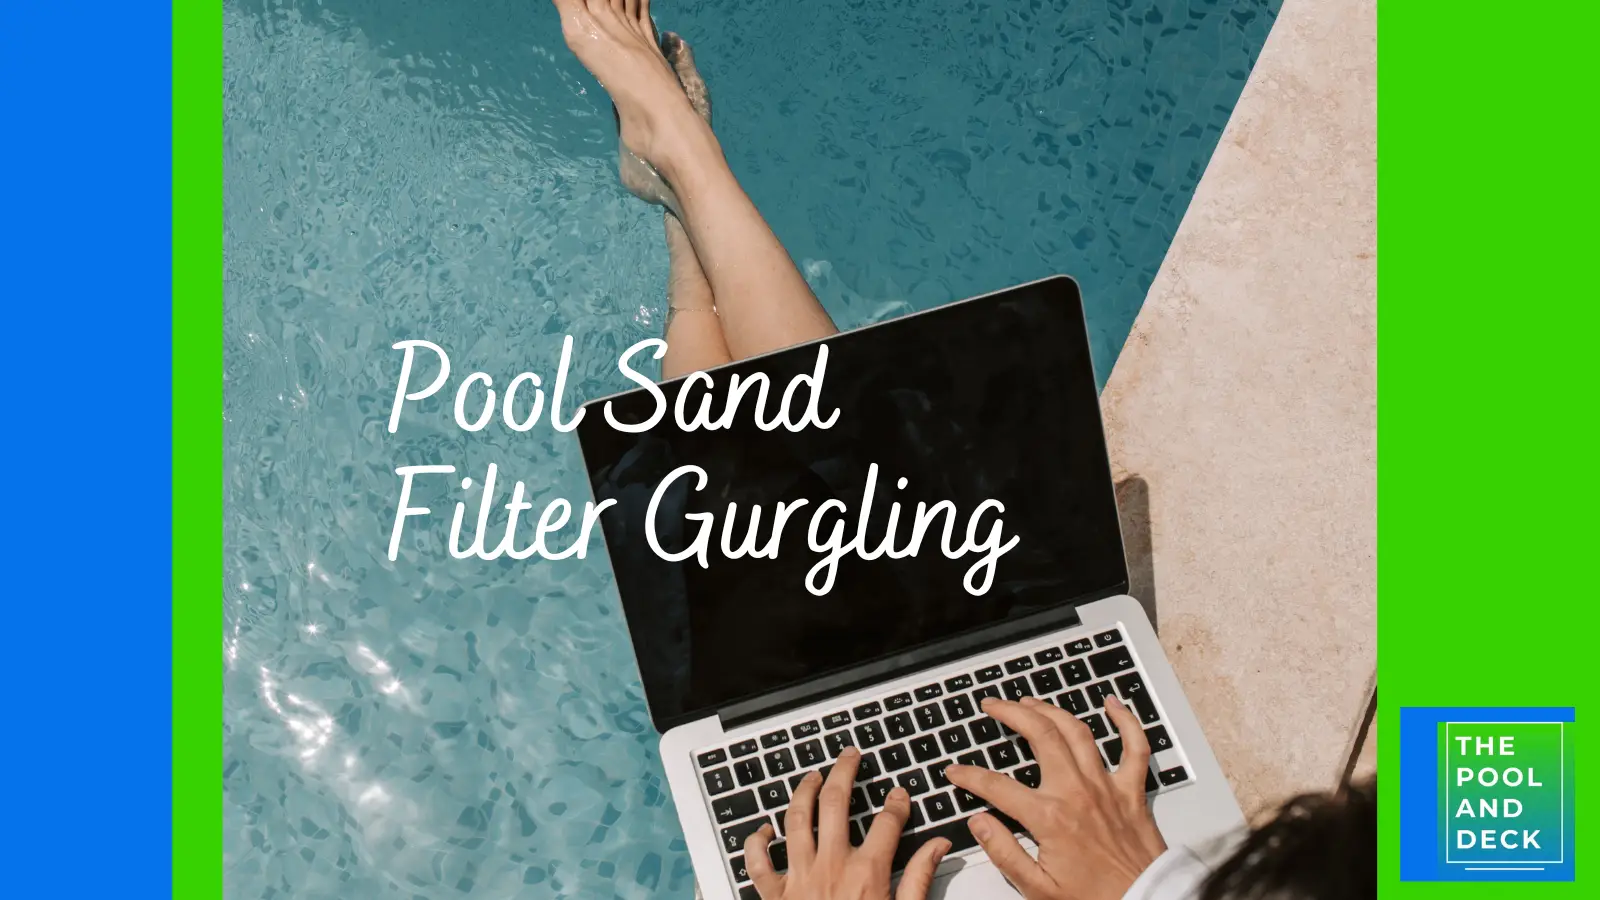 Pool Sand Filter Gurgling: 6 Unusual Defects To Look For!